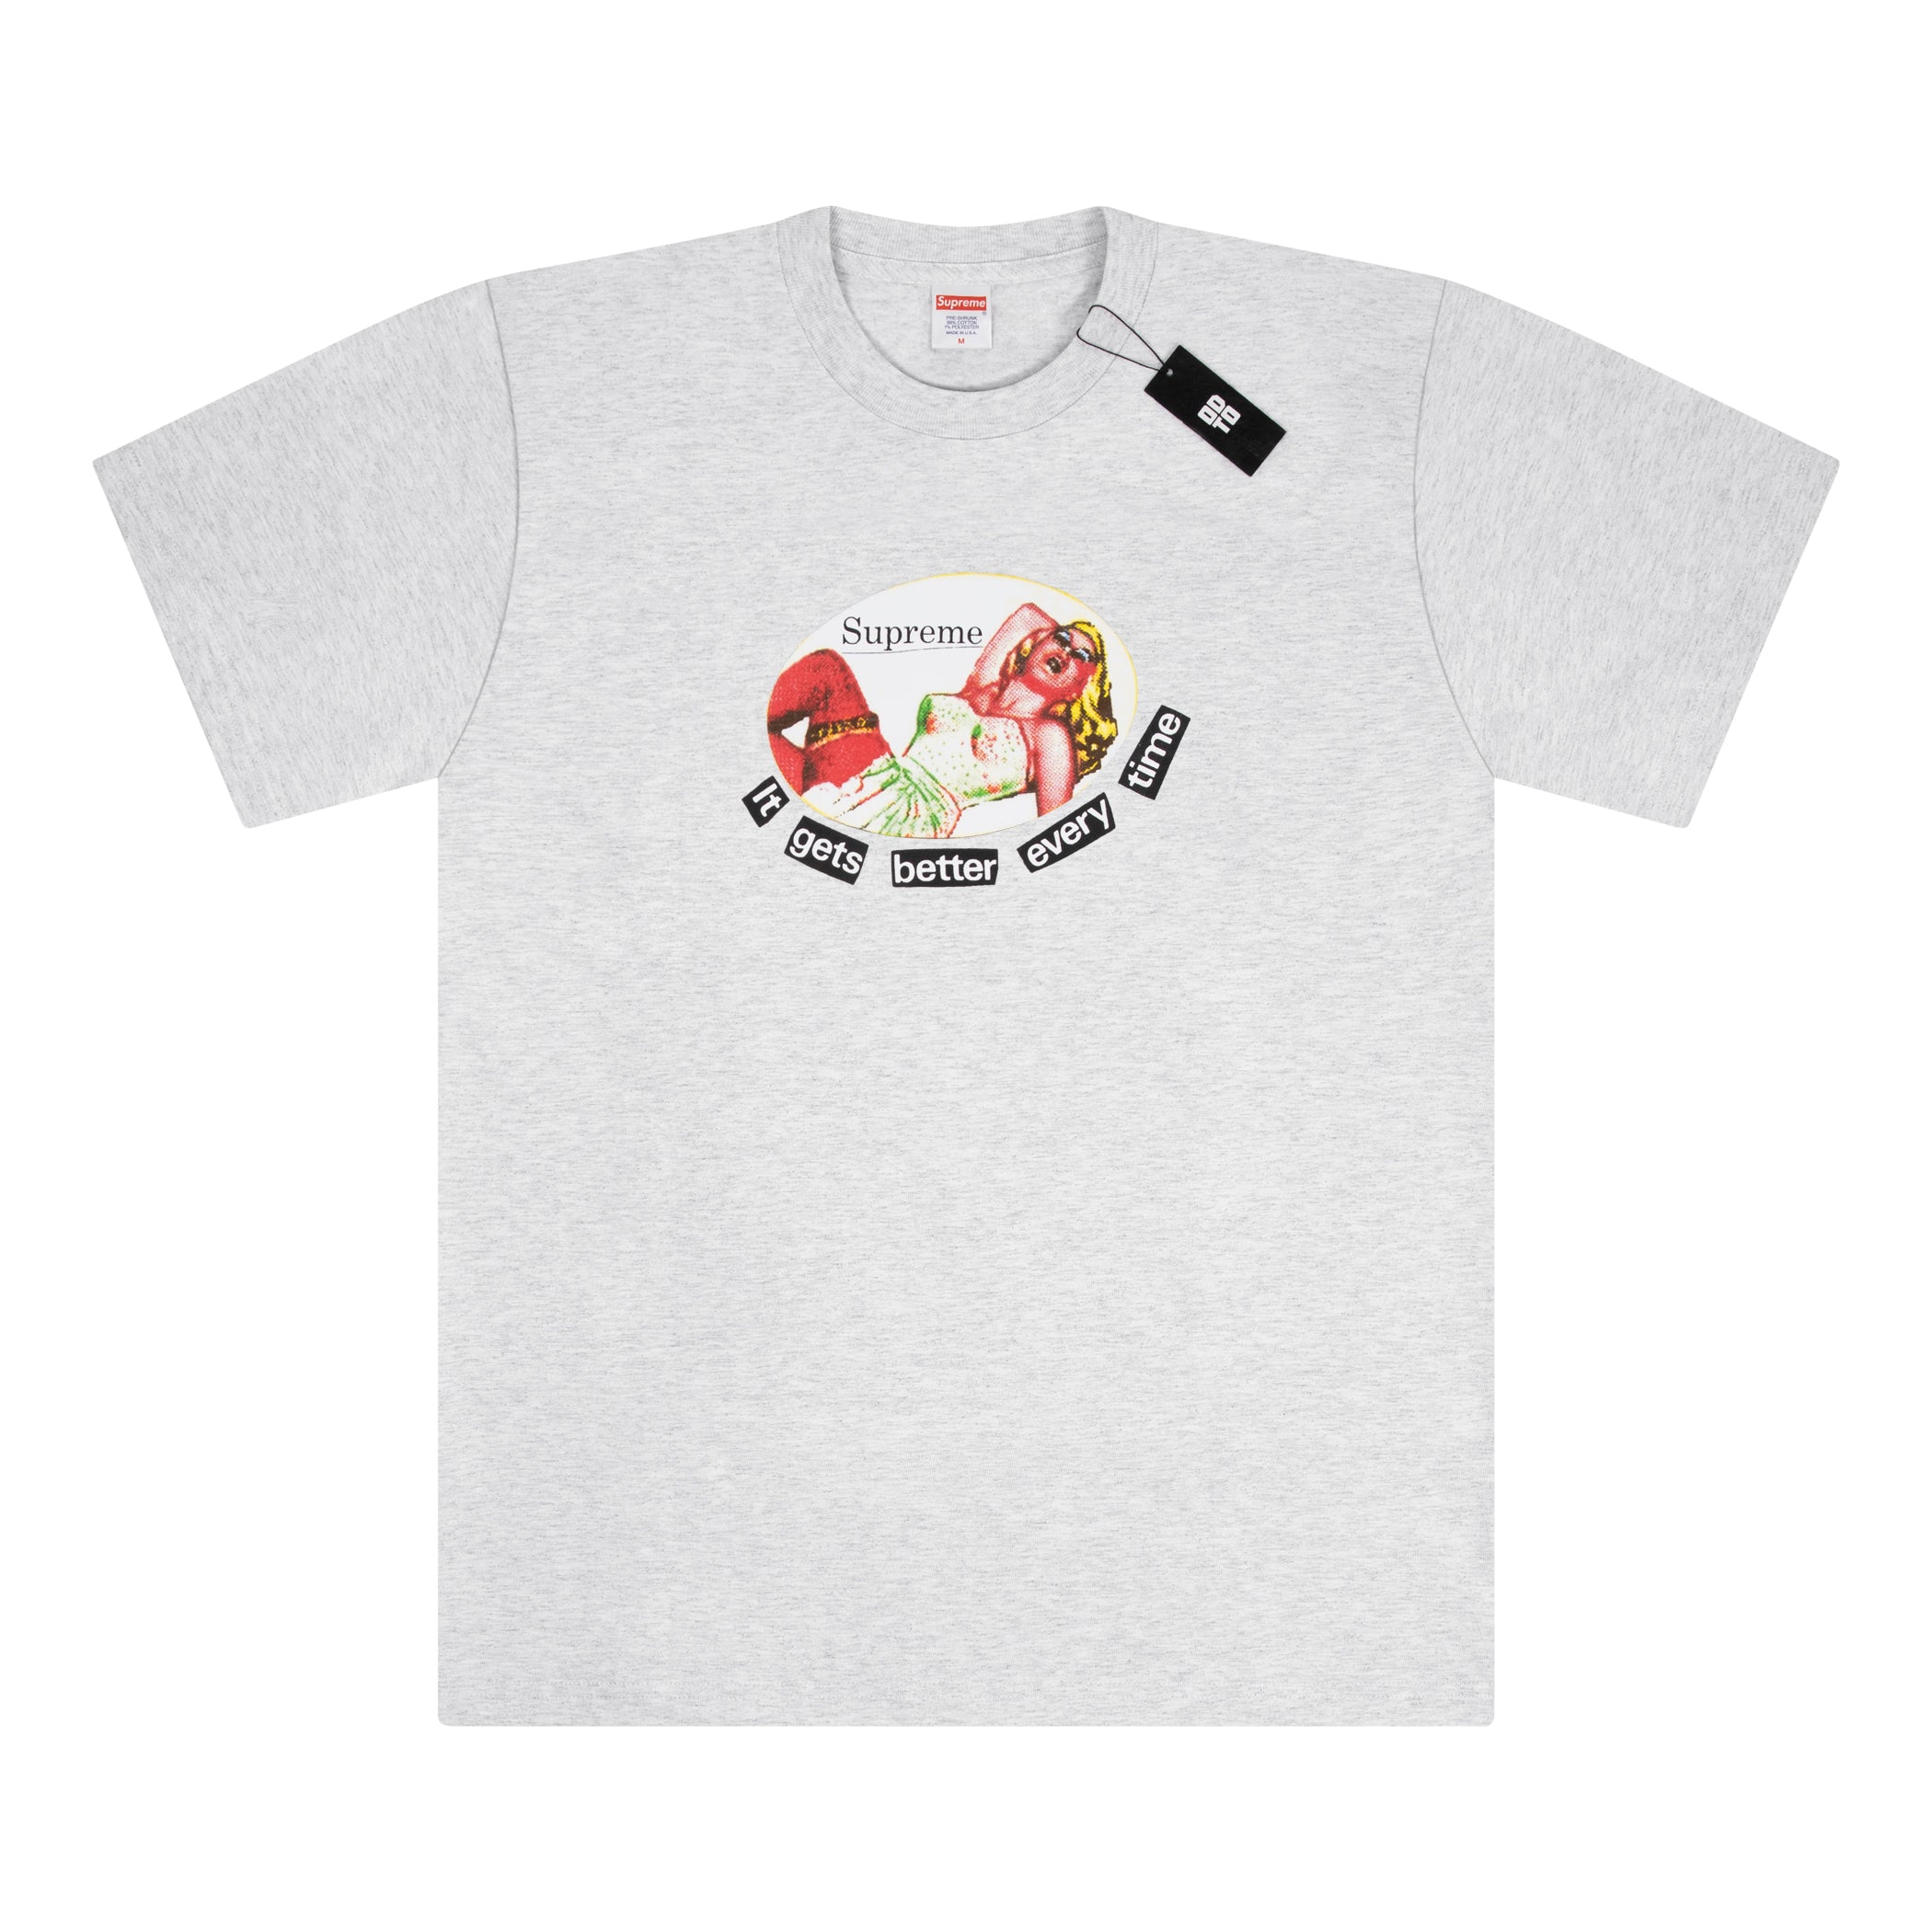 SUPREME IT GETS BETTER EVERY TIME TEE